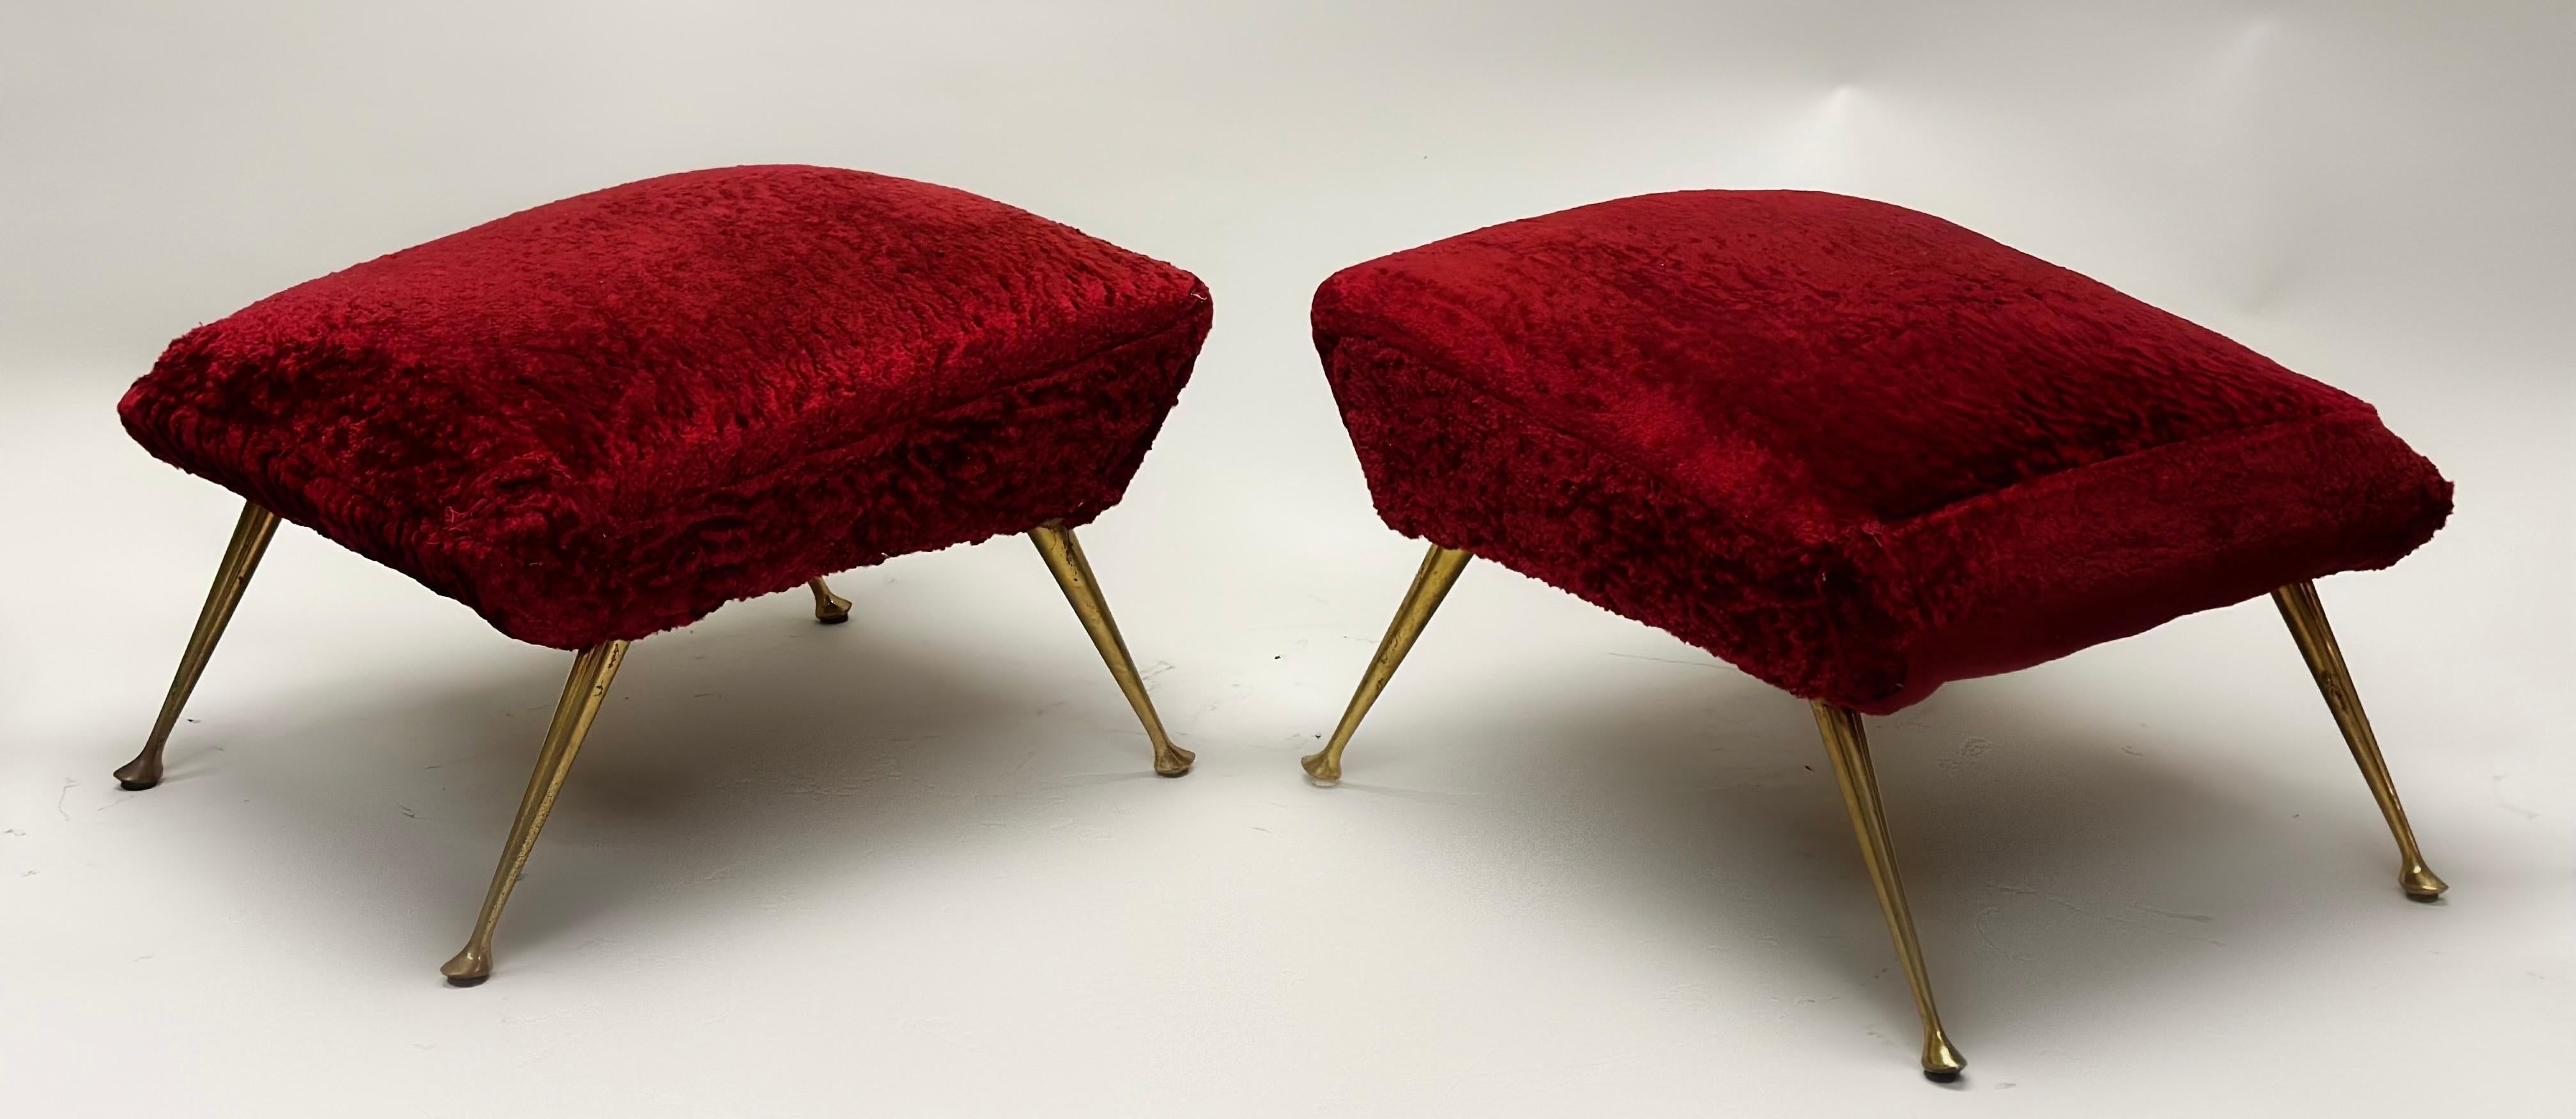 Rare Pair of Italian Futurist Stools / Ottomans or Benches Attributed to Gigi Radice. These original Mid-Century Modern pieces are very special in embracing the Futurist aesthetic of speed and continual forward movement in their design. The seats